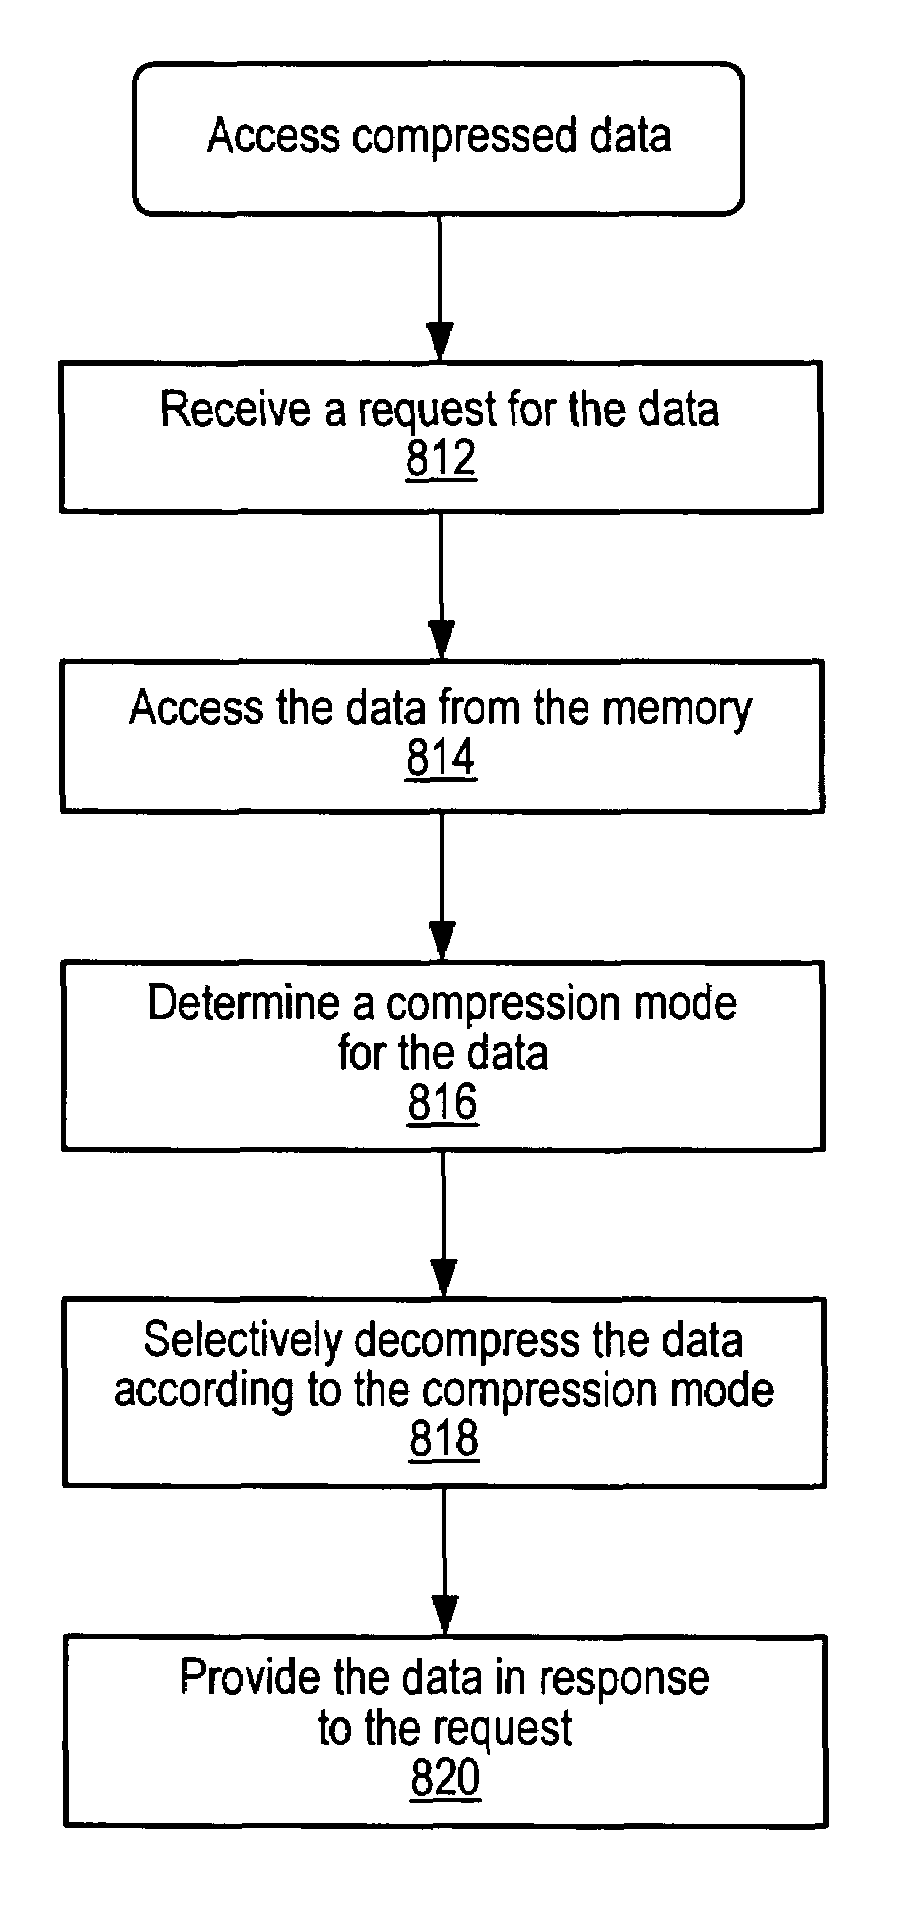 Selective lossless, lossy, or no compression of data based on address range, data type, and/or requesting agent